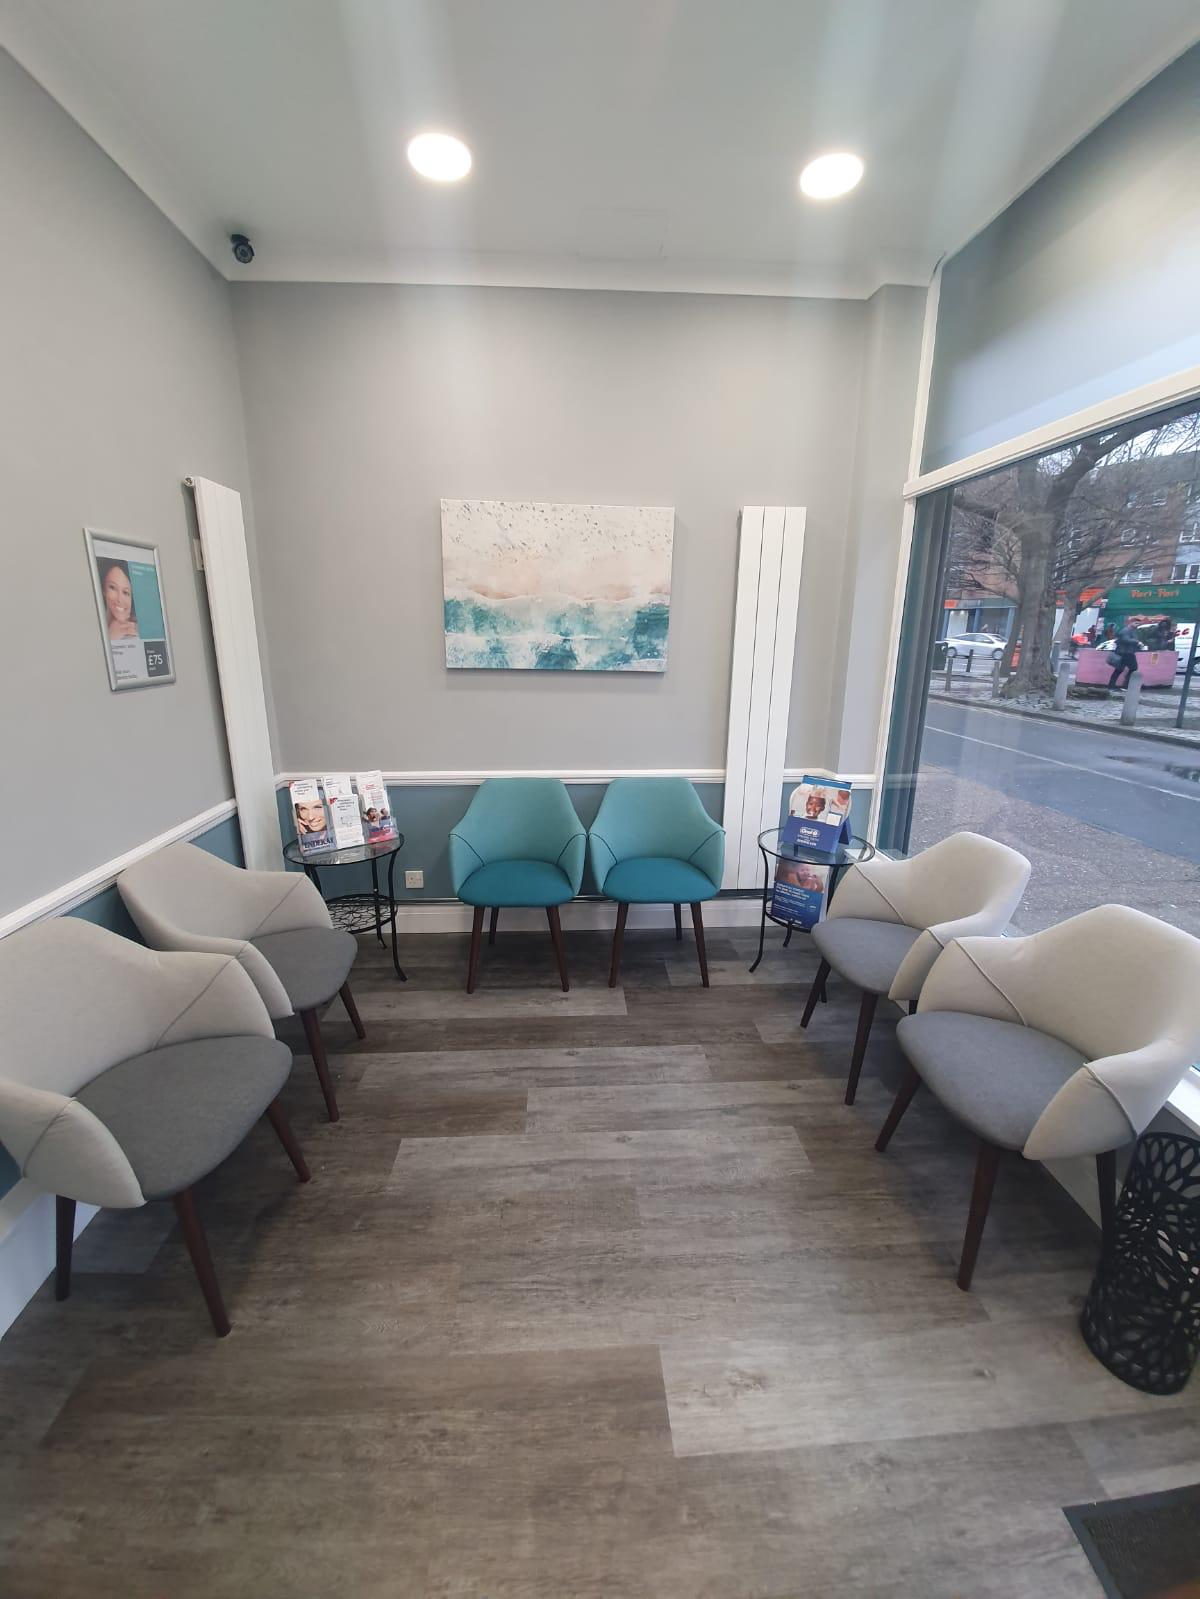 SW9 Dental with Made.com chairs